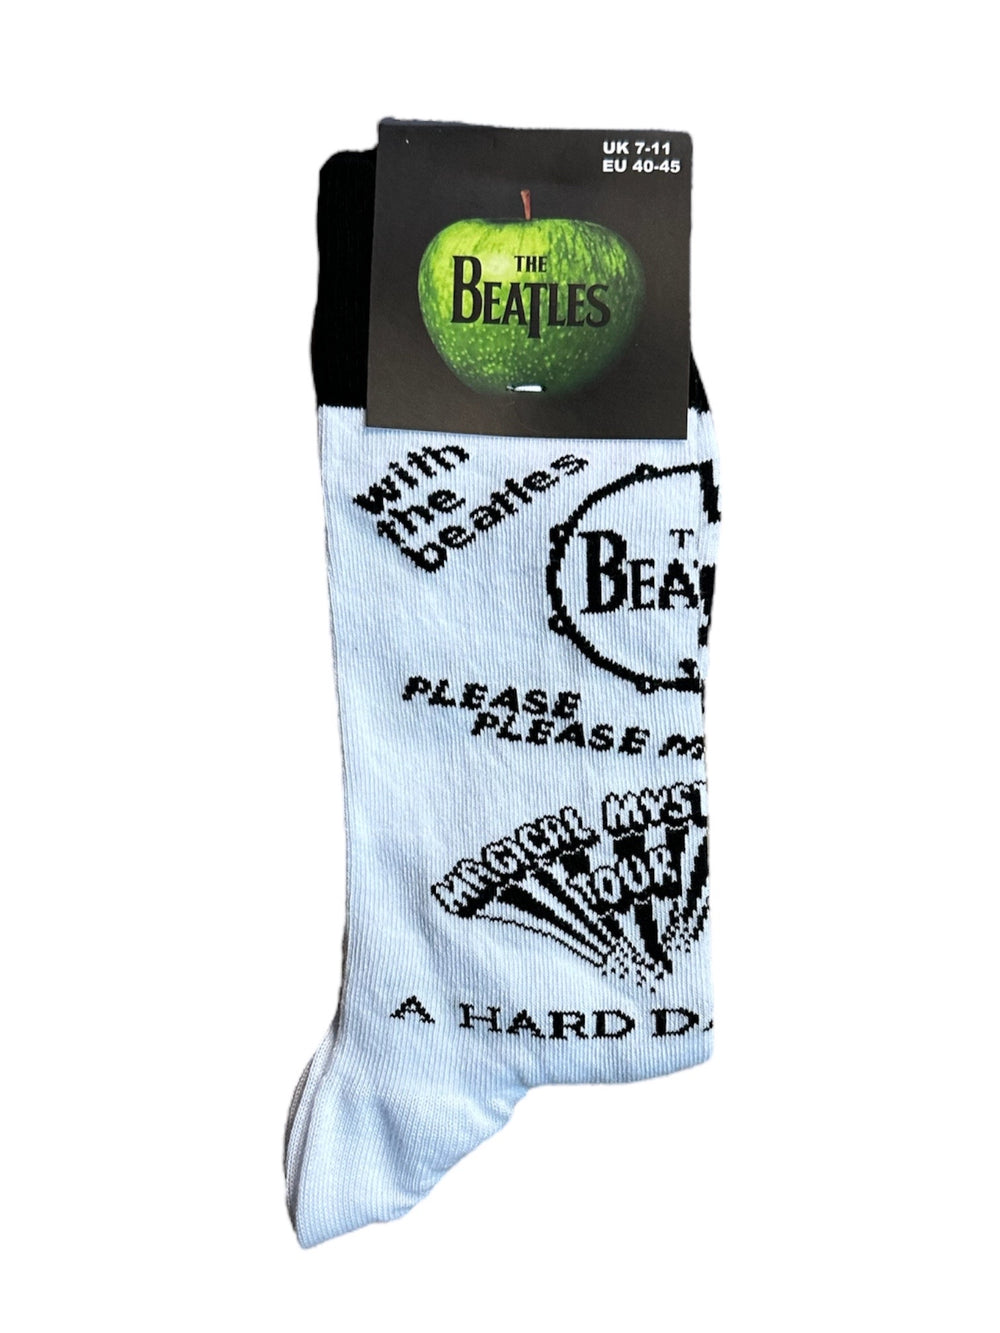 Beatles The Albums Monochrome White Official Product 1 Pair Jacquard Socks Brand New